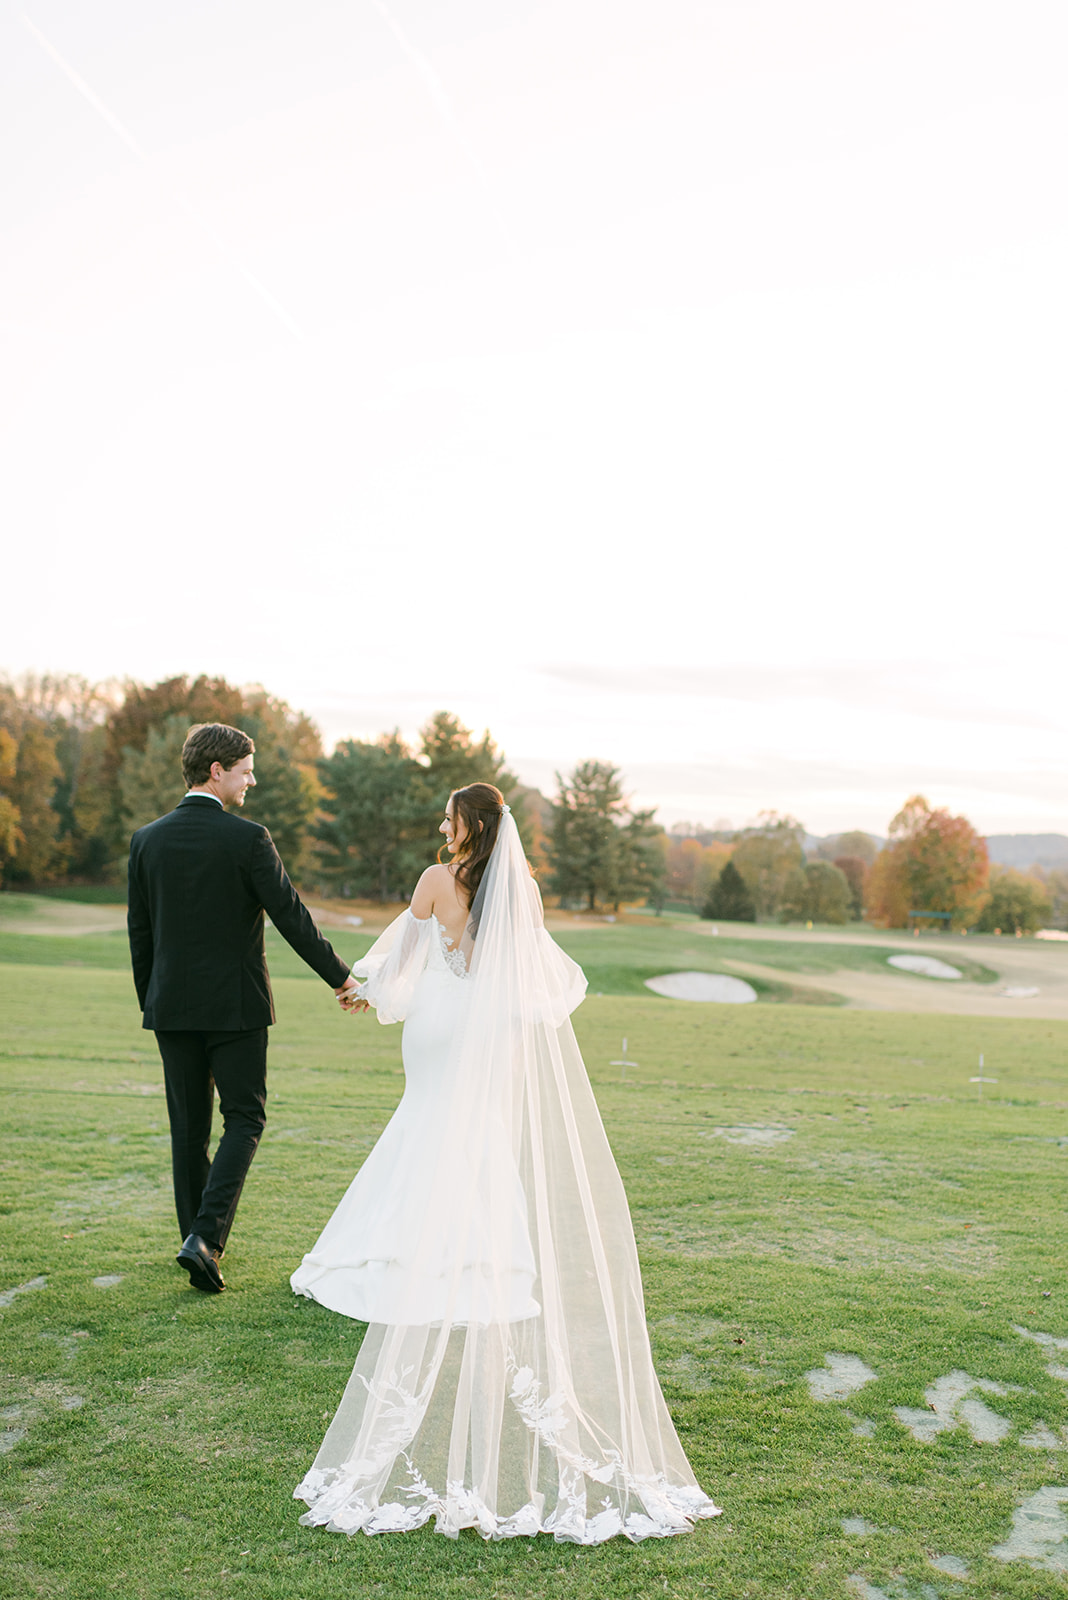 Bride and Groom walking on the golf course at the Virginian at sunset.